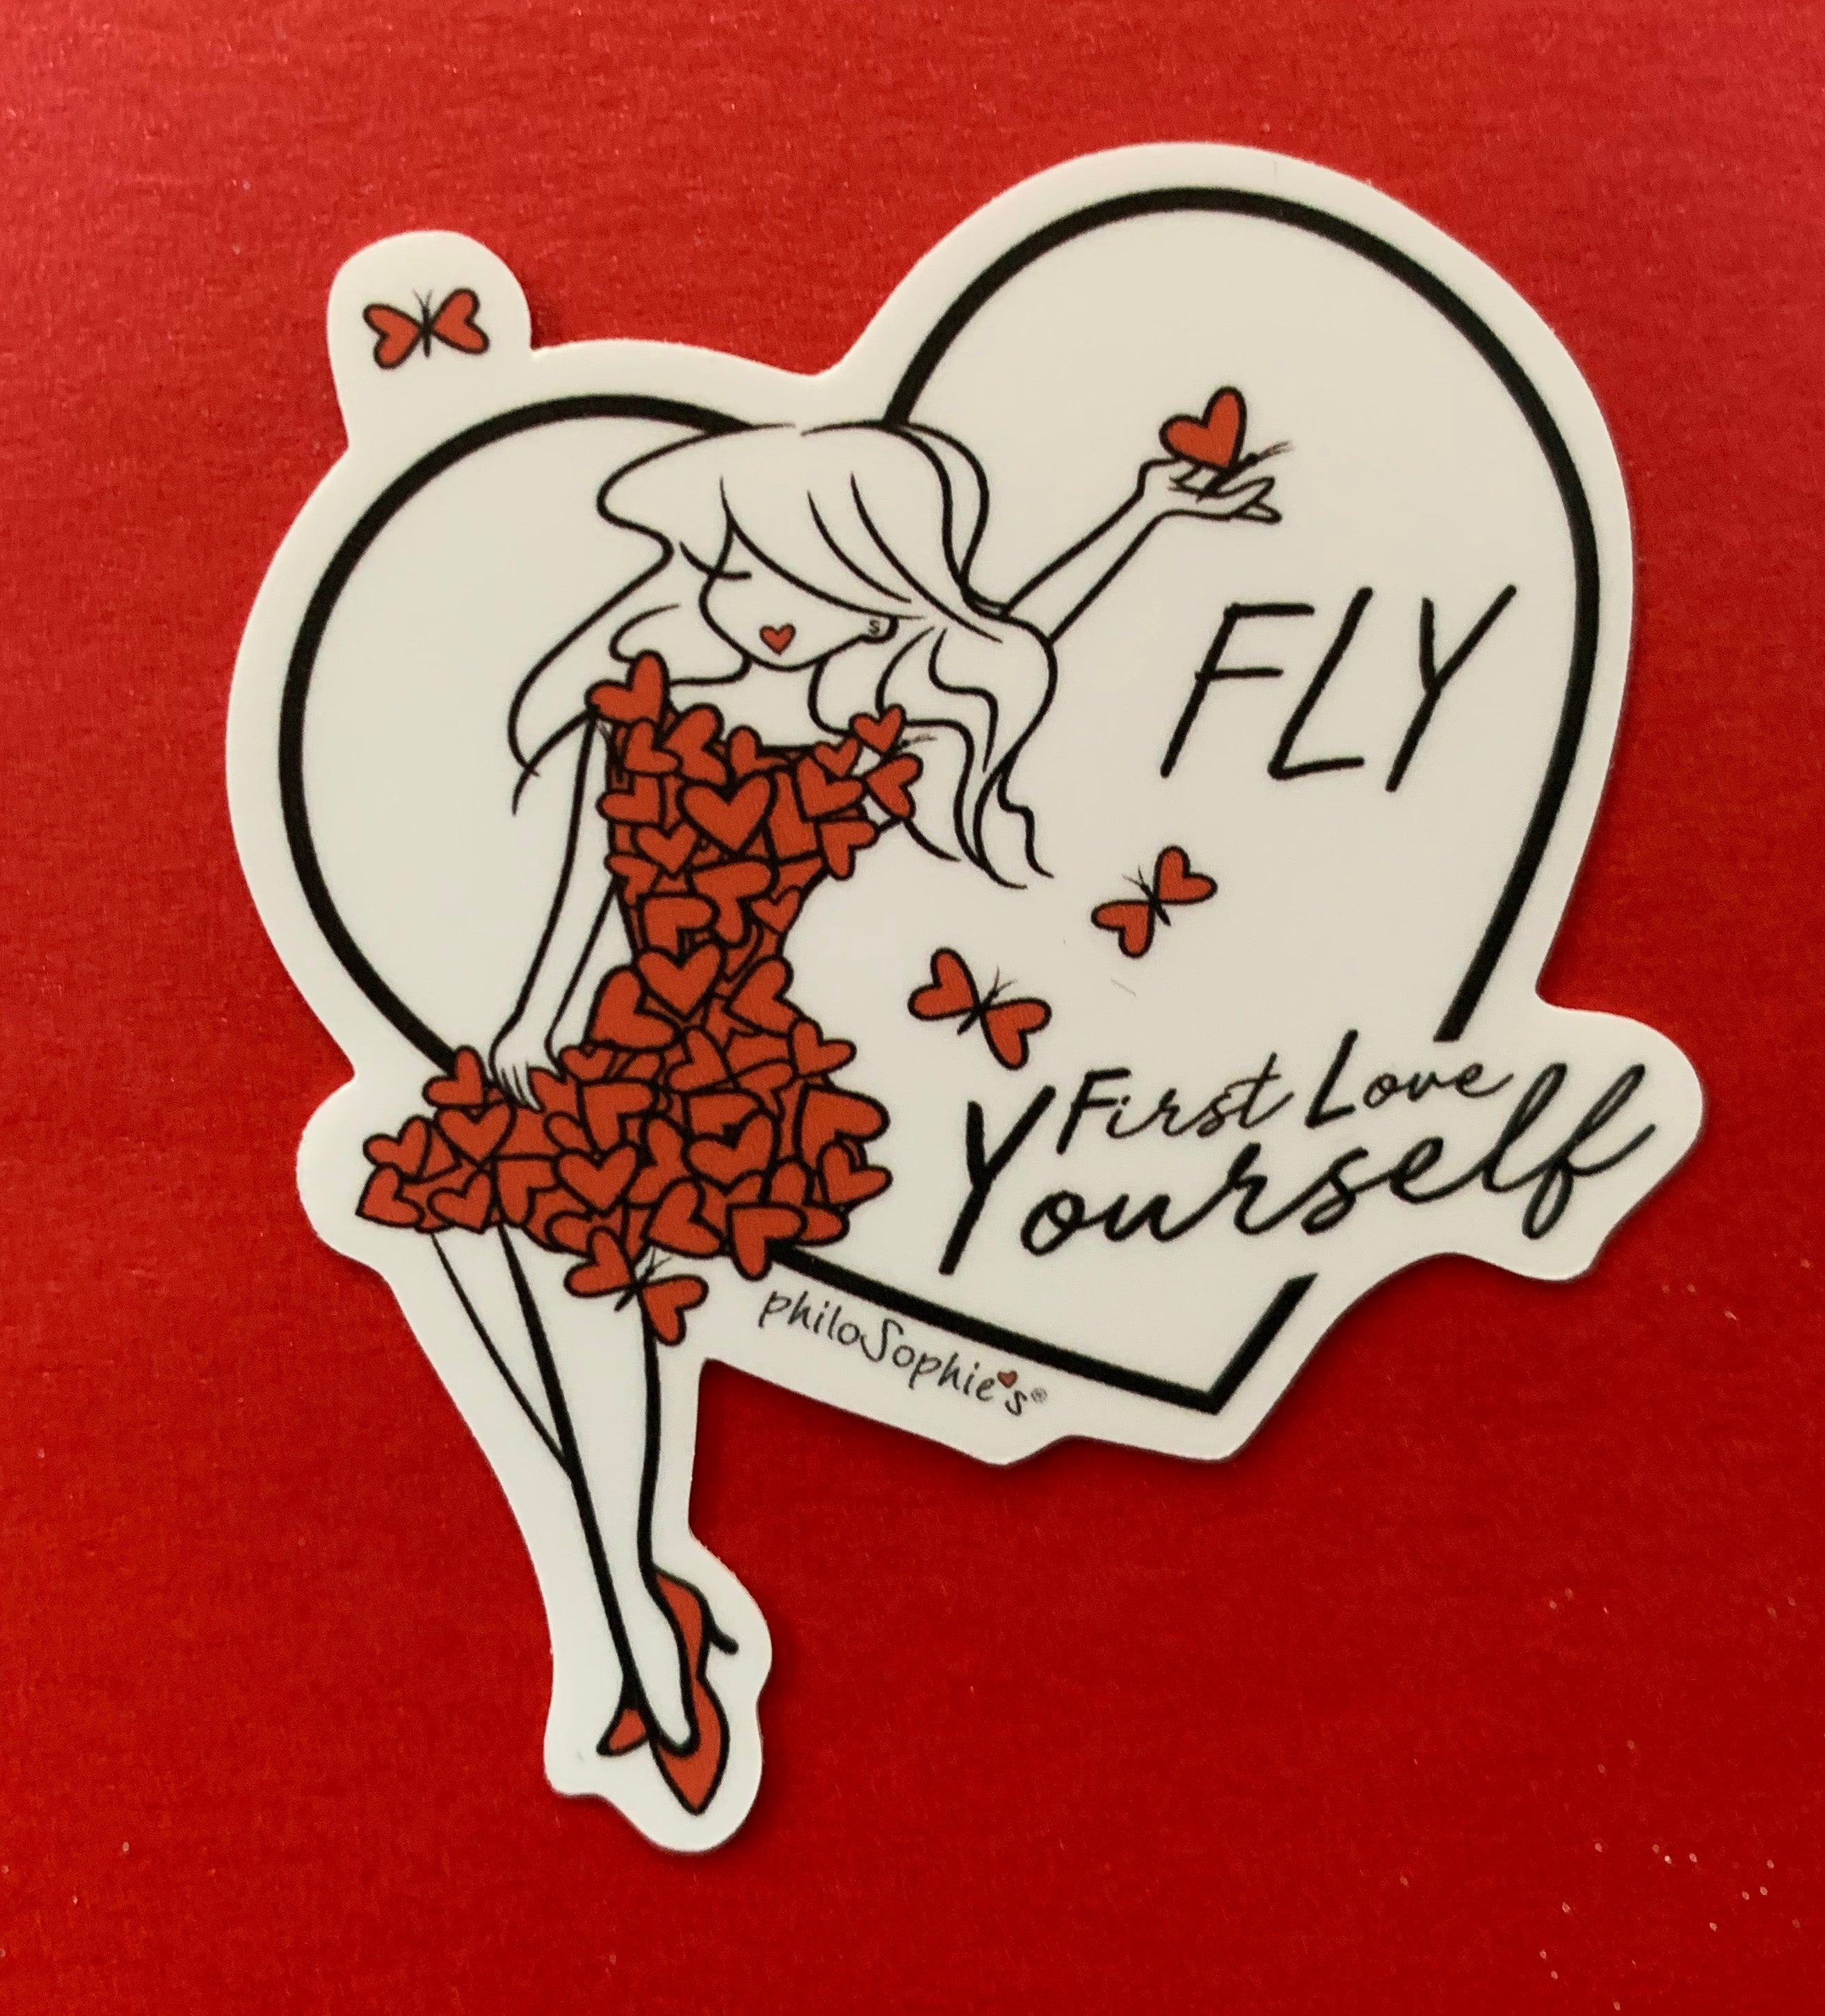 FLY - First Love Yourself philoSophie's  15 ounce Ceramic Mug